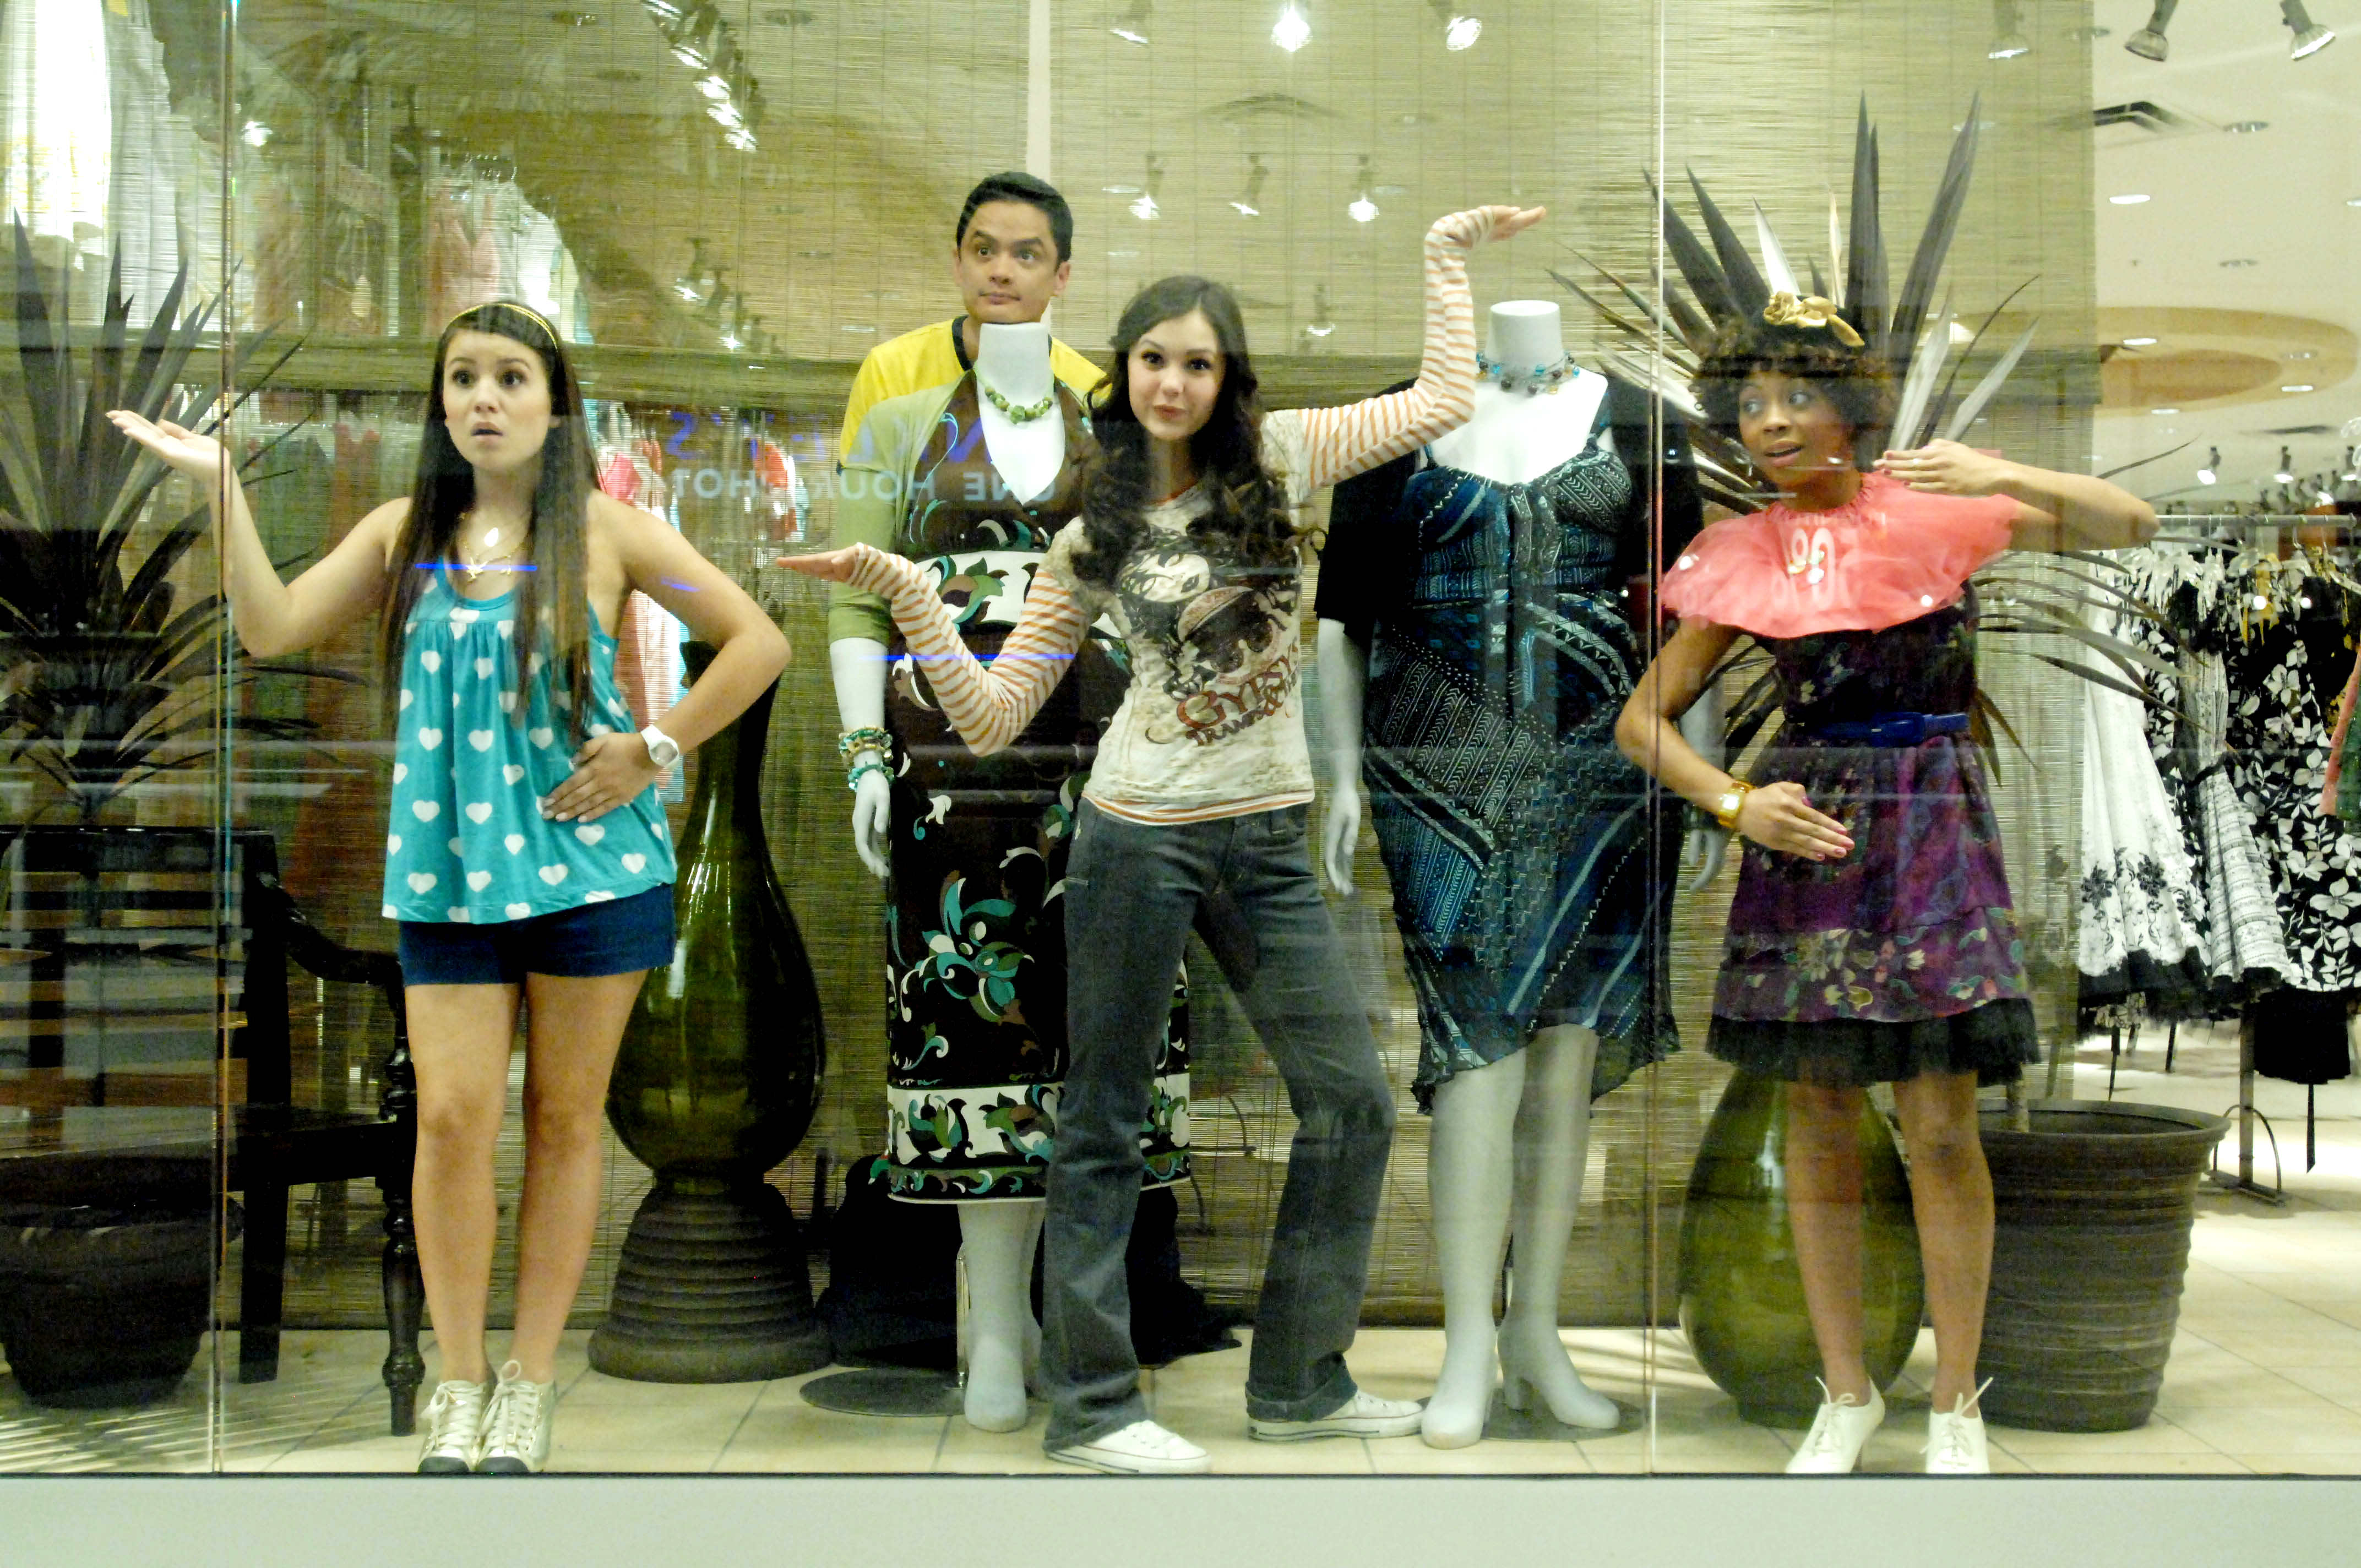 Ally (Nina Dobrev) and friends hide from security in The American Mall (2008)